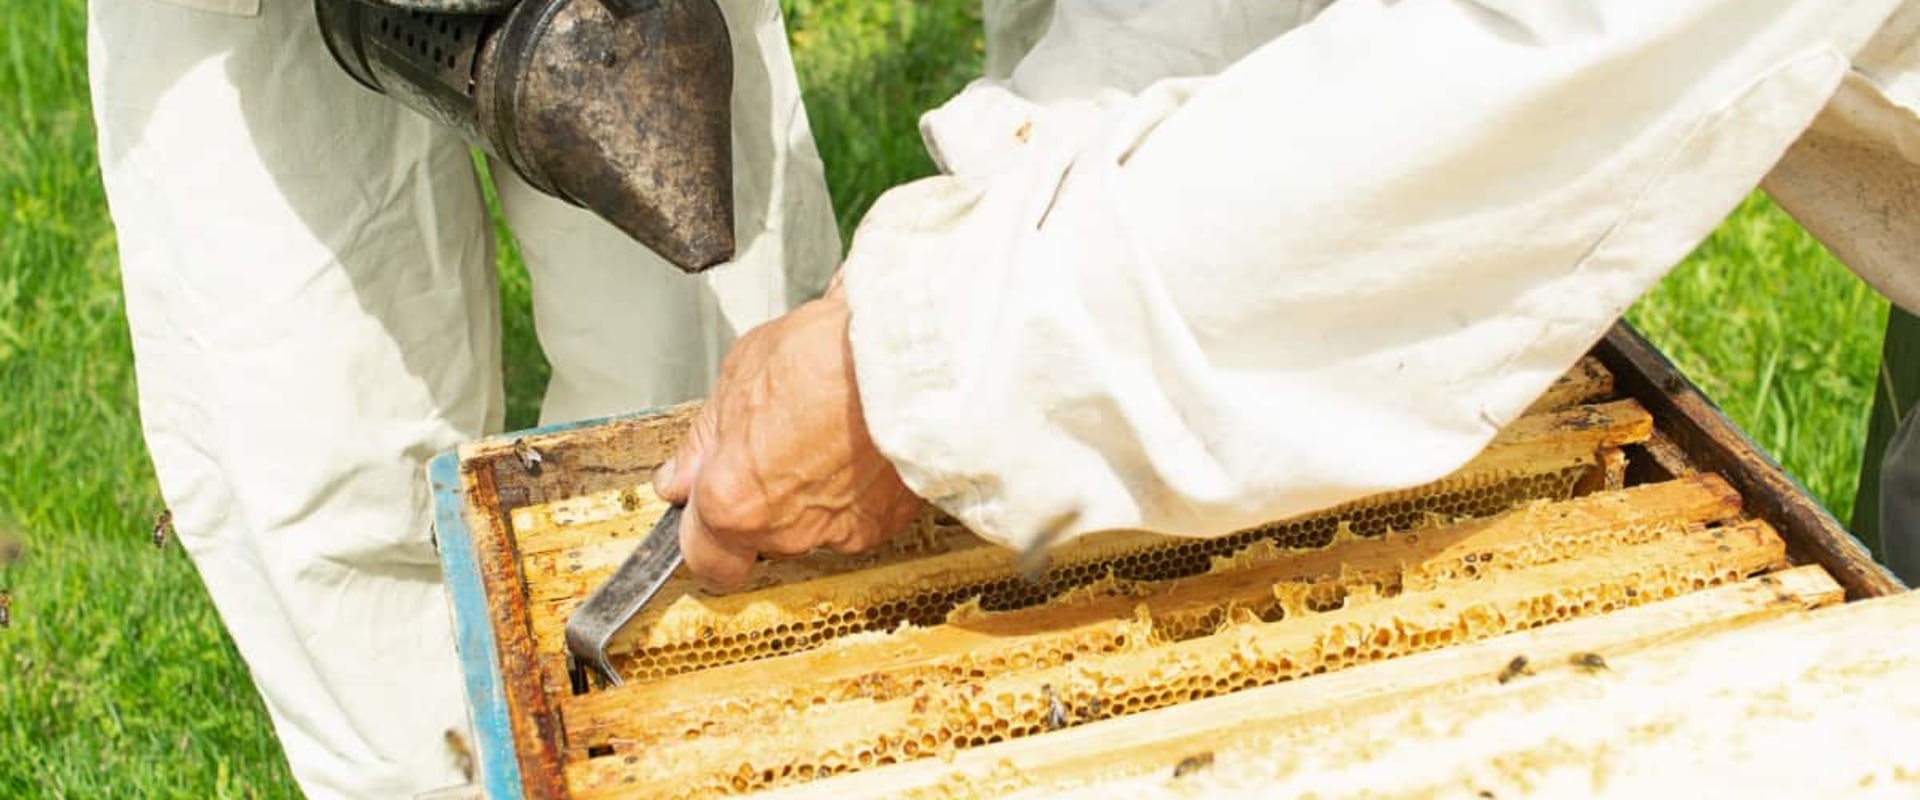 How quickly can bees fill a honey super?